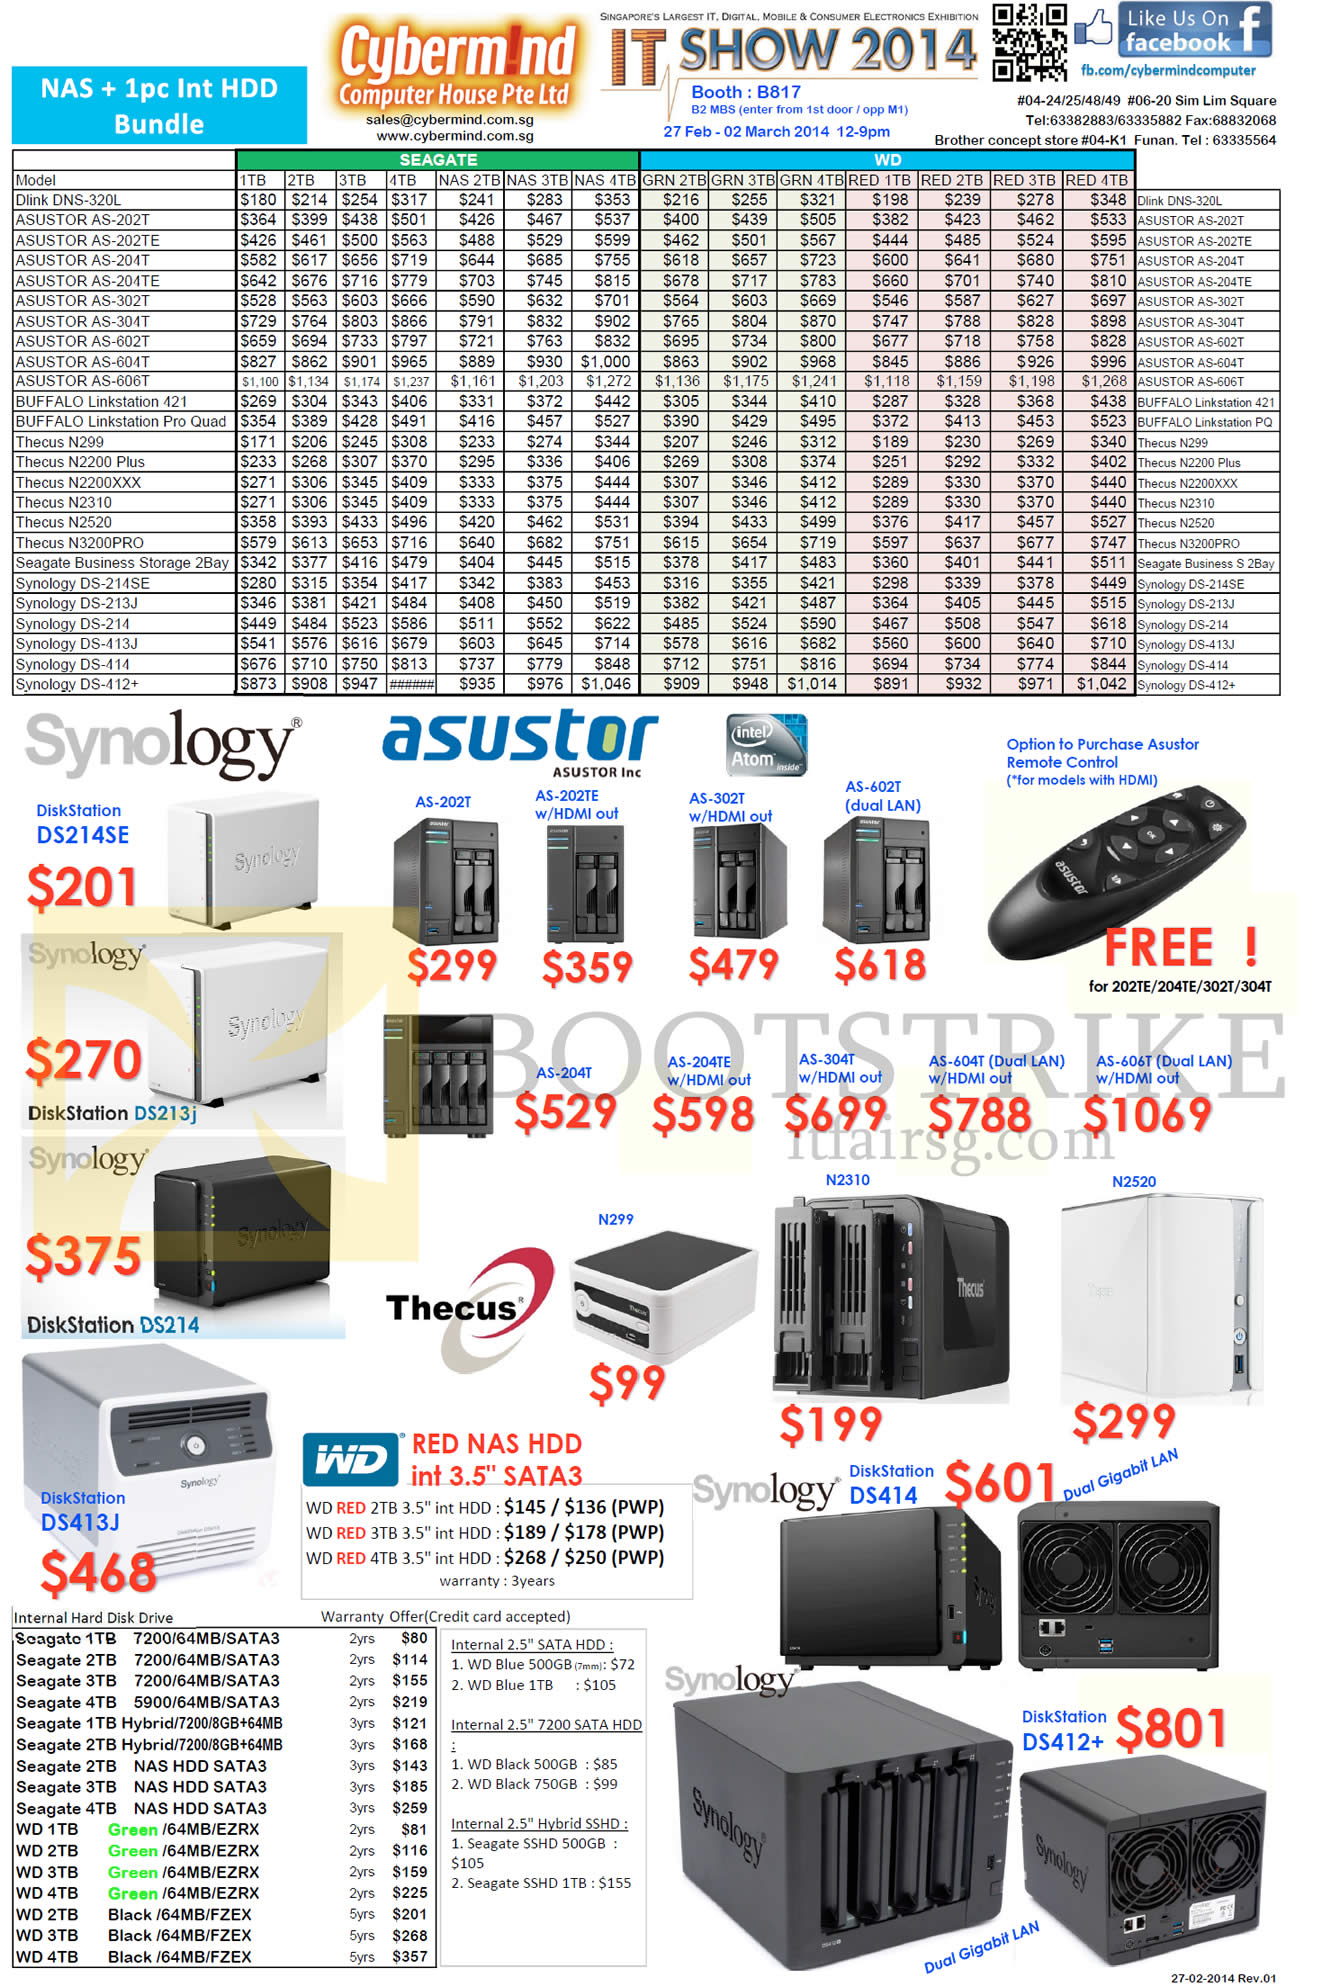 IT SHOW 2014 price list image brochure of Cybermind NAS Synology DiskStation, Asustor, Thecus, Buffalo, D-Link, Internal HDD HardDisk Drive